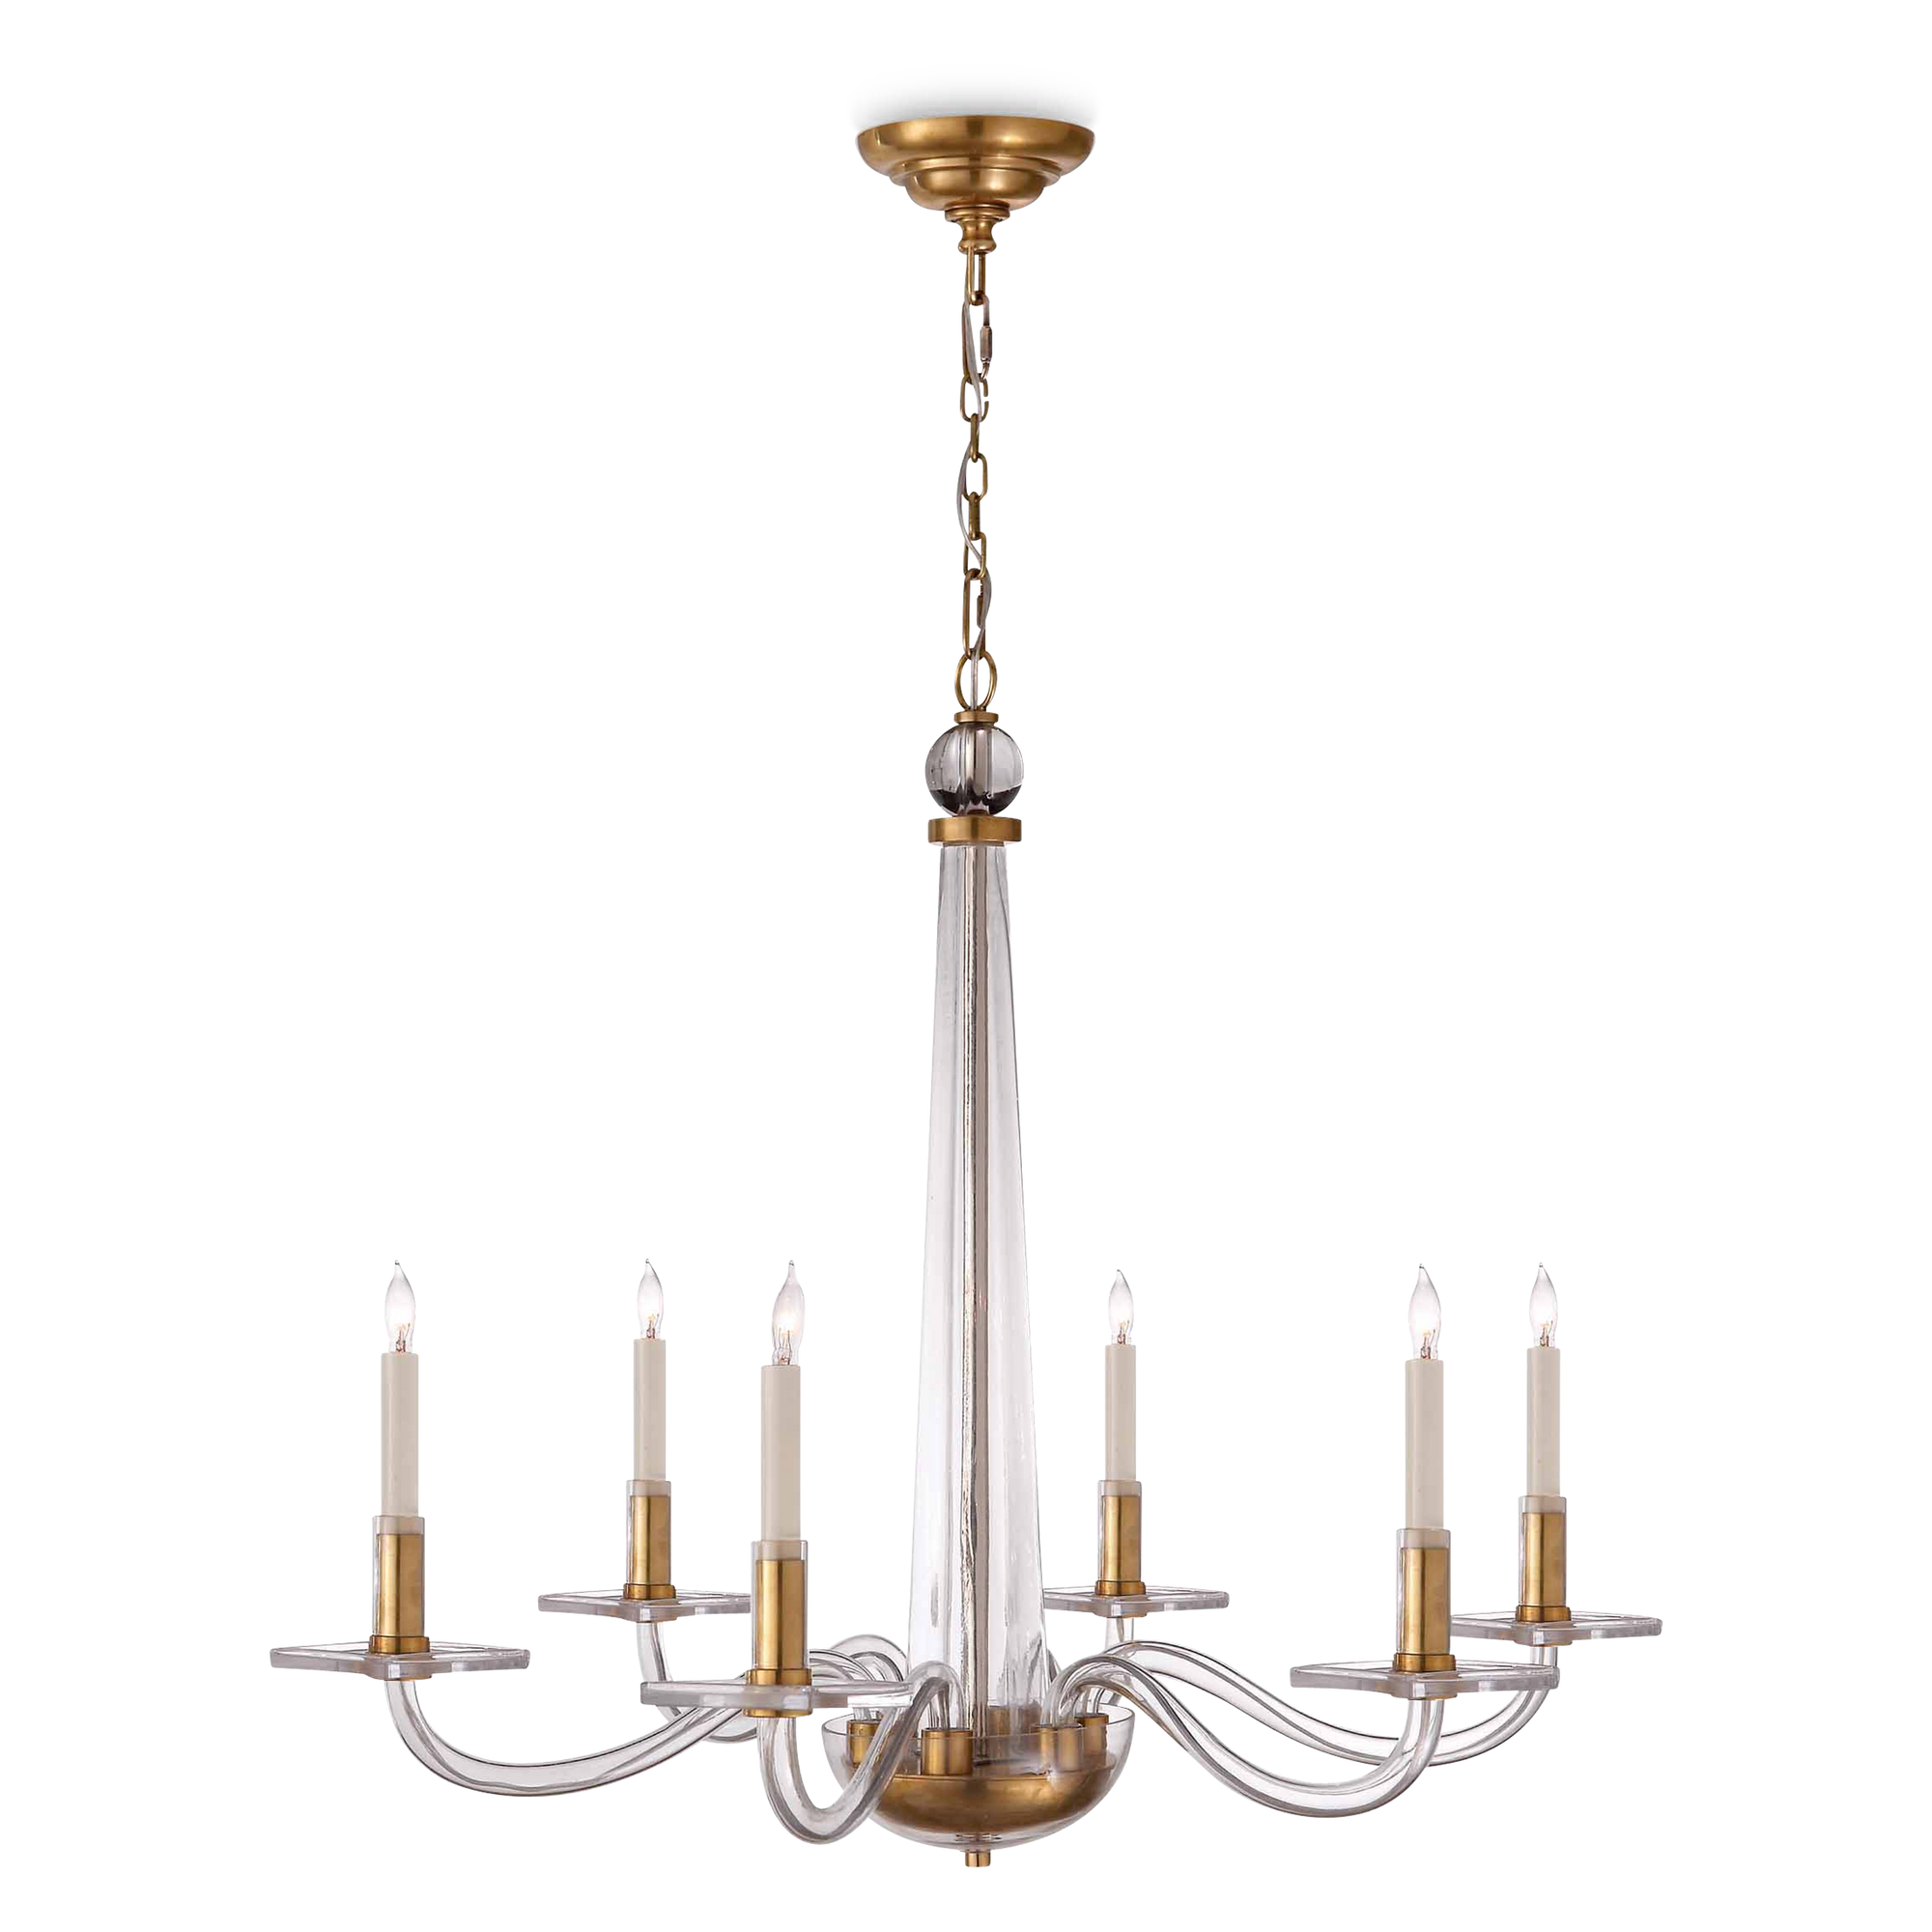 A seeded clear glass shade suspended from hand-rubbed antique brass forms this sleek and modern chandelier.